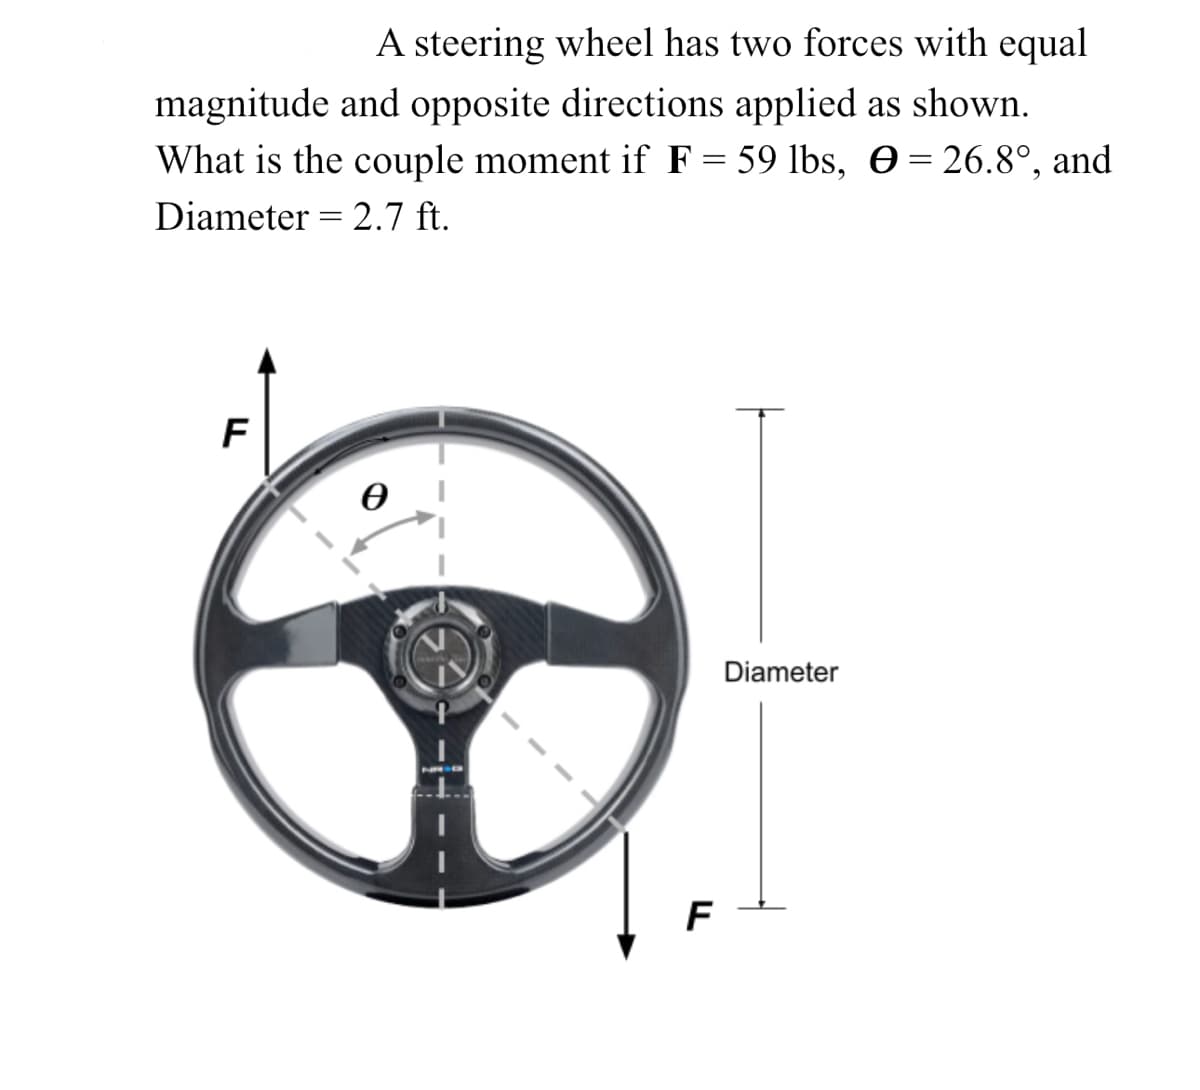 A steering wheel has two forces with equal
magnitude and opposite directions applied as shown.
What is the couple moment if F = 59 lbs, O= 26.8°, and
Diameter = 2.7 ft.
F
F
Diameter